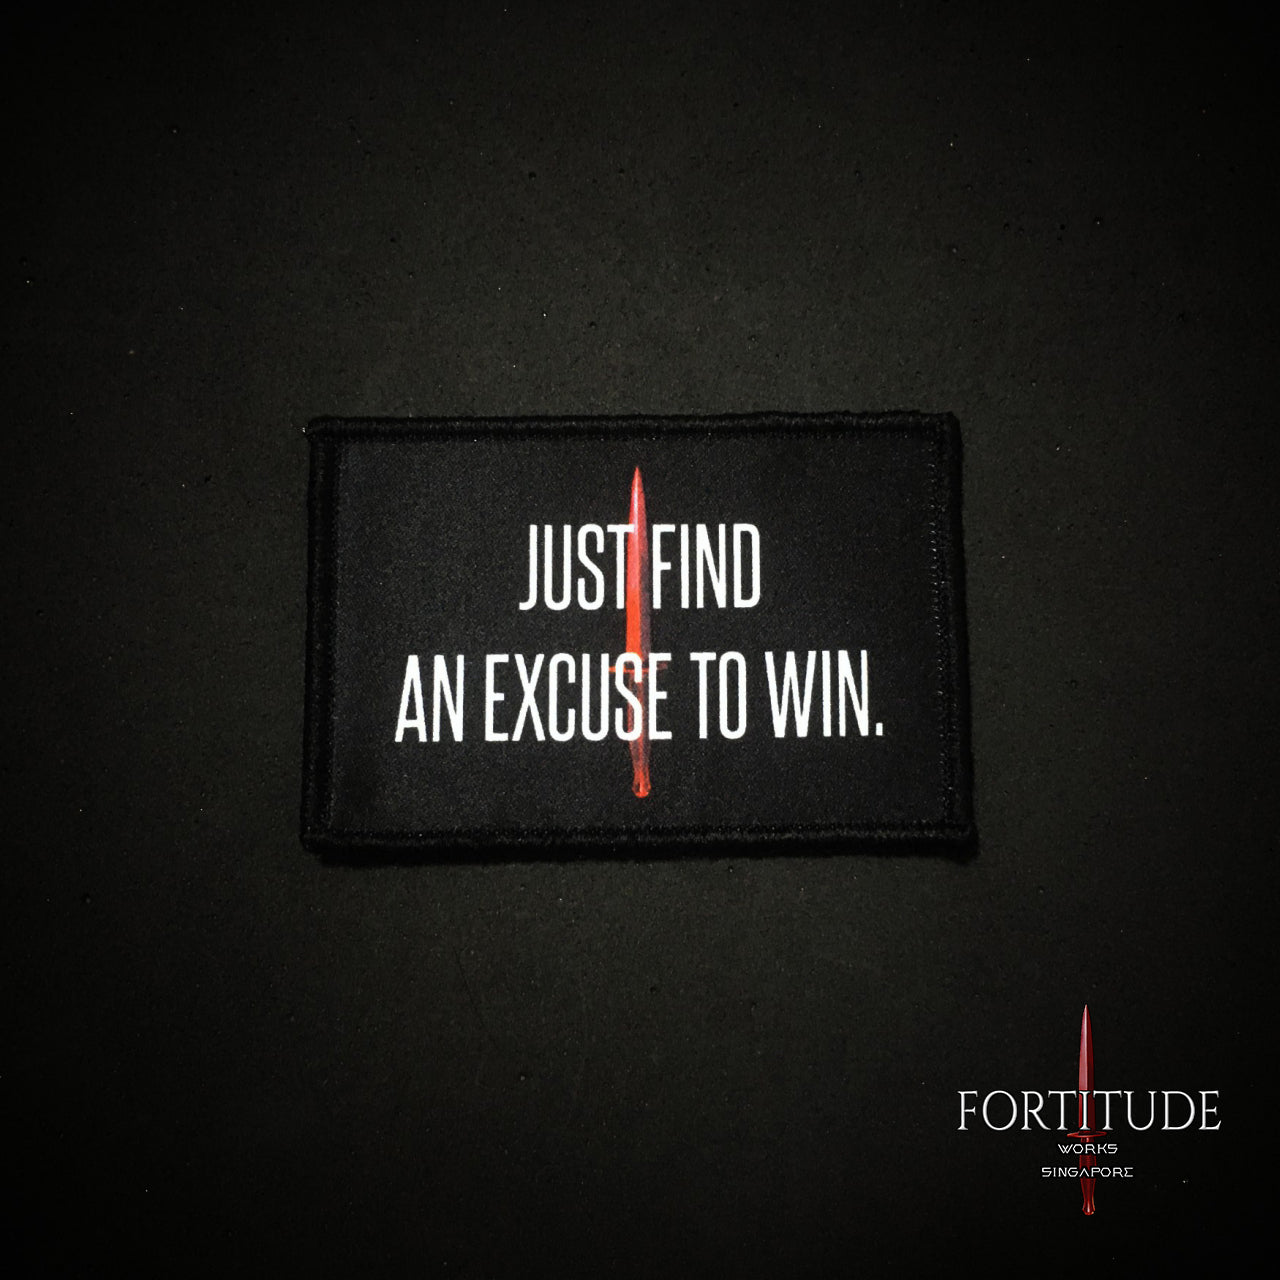 JUST FIND AN EXCUSE TO WIN - FORTITUDE WORKS SINGAPORE